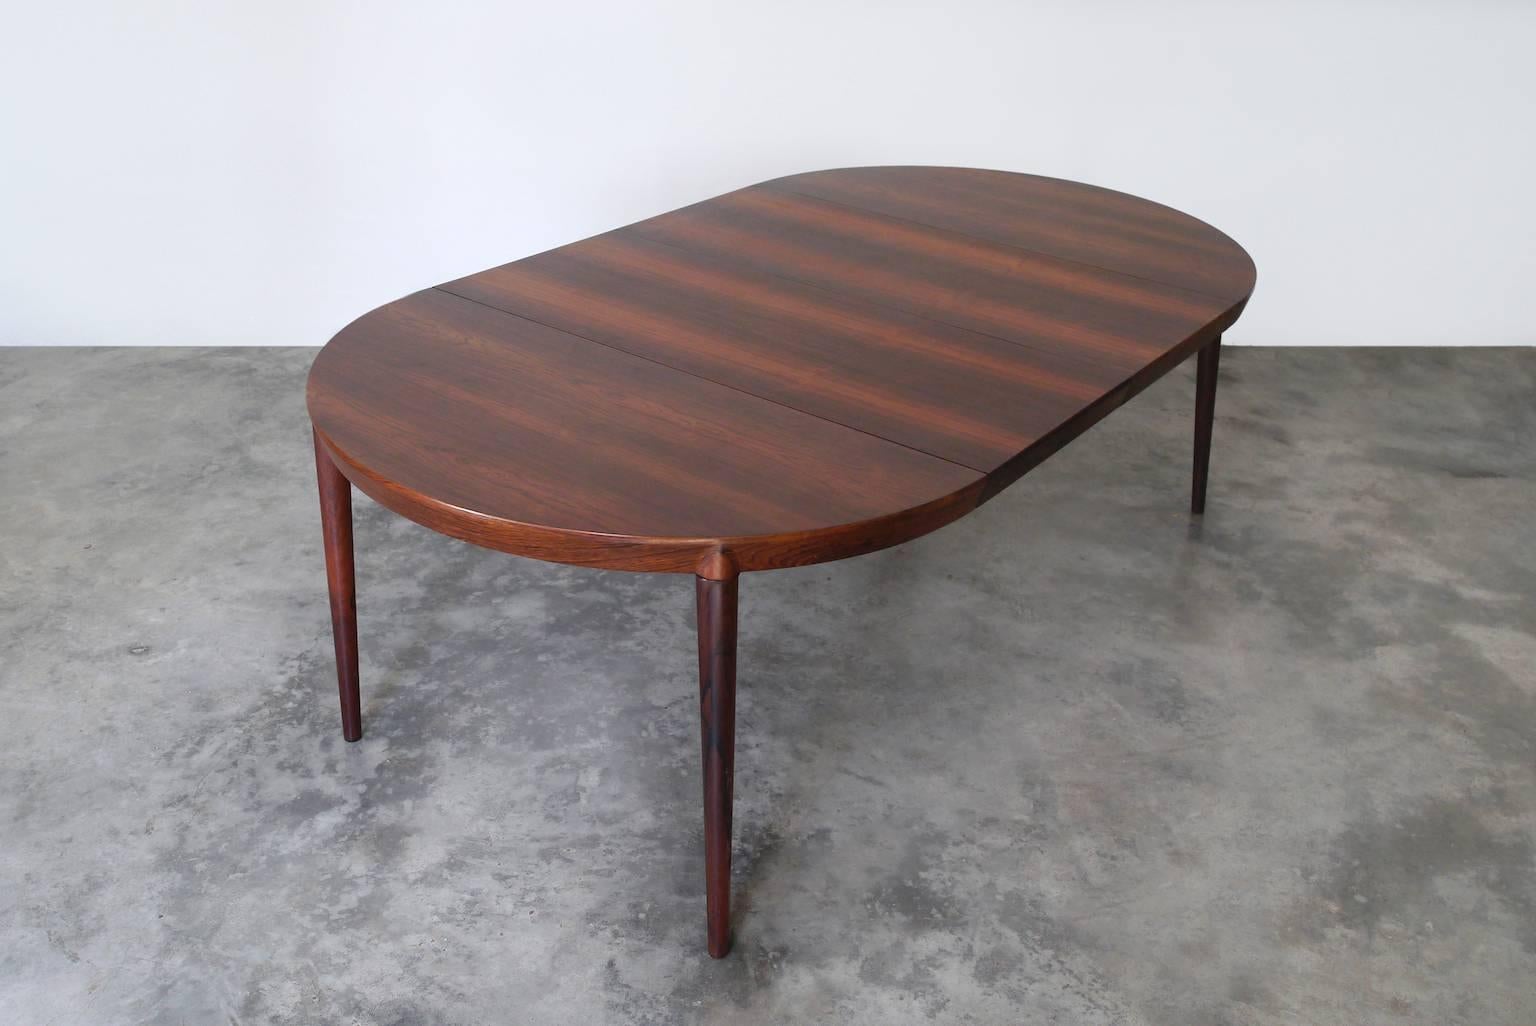 A stunning rosewood dining table (model #71) that features Severin Hansen's signature angled joinery. The richly grained tabletop has a beveled edge that joins seamlessly with each leg. The table can be used with one-two leaves to extend it for up